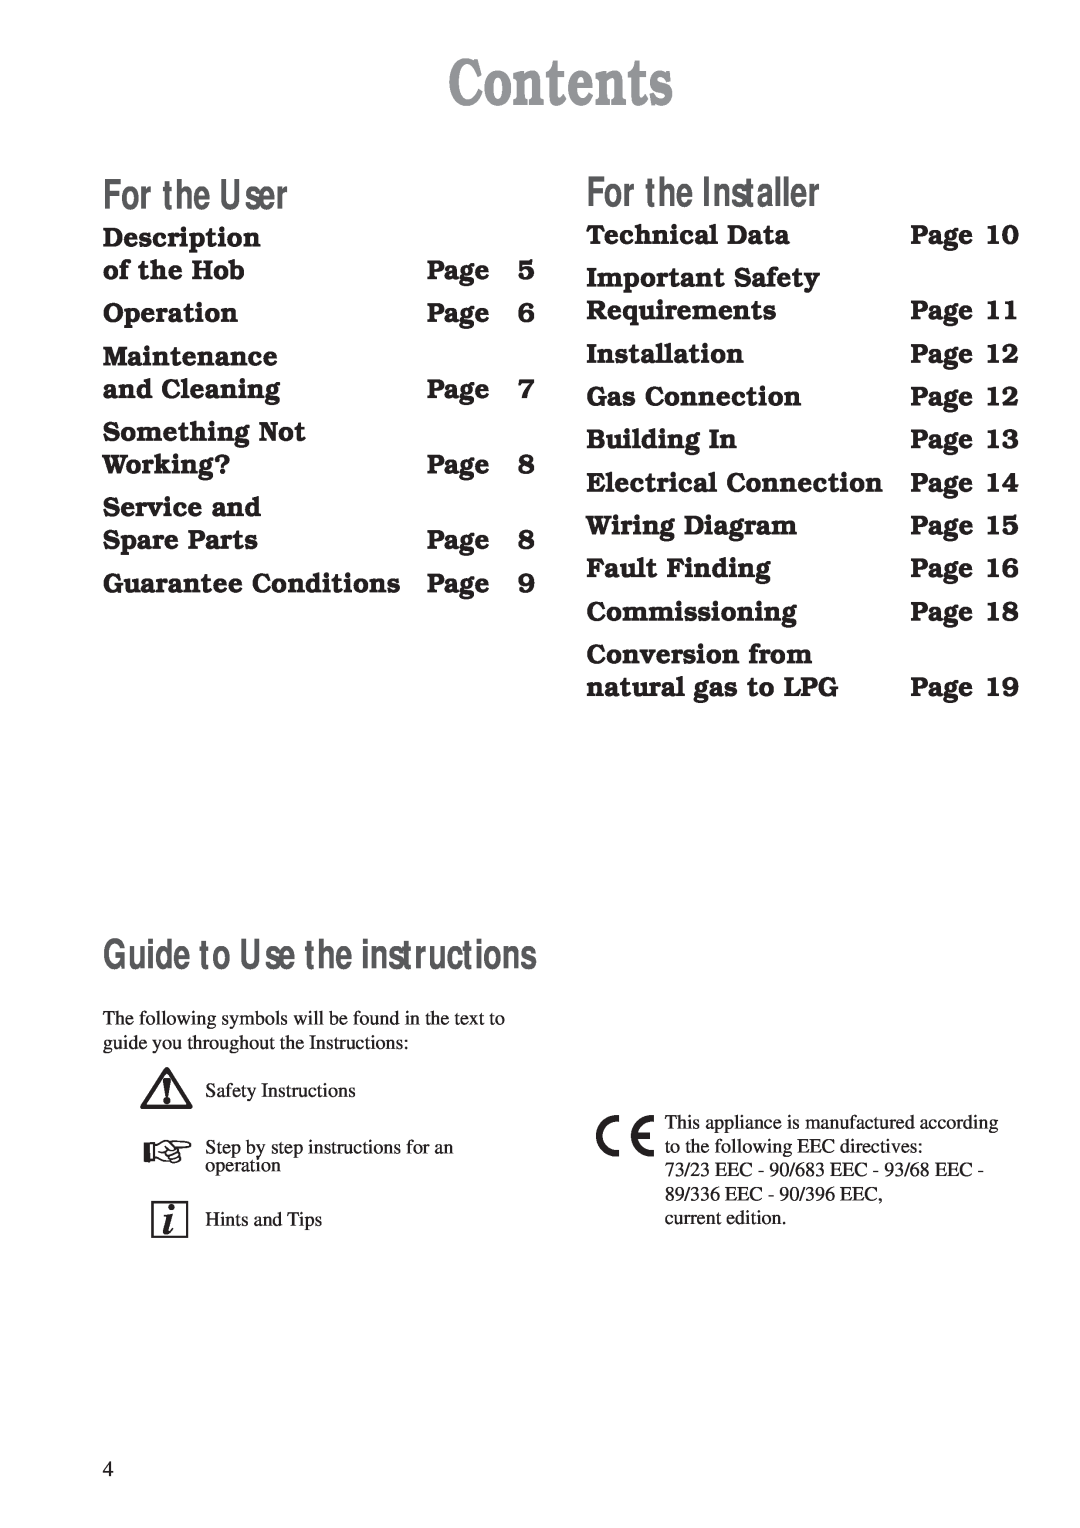 Zanussi ZAF 42 manual Contents, For the User, For the Installer, Guide to Use the instructions 